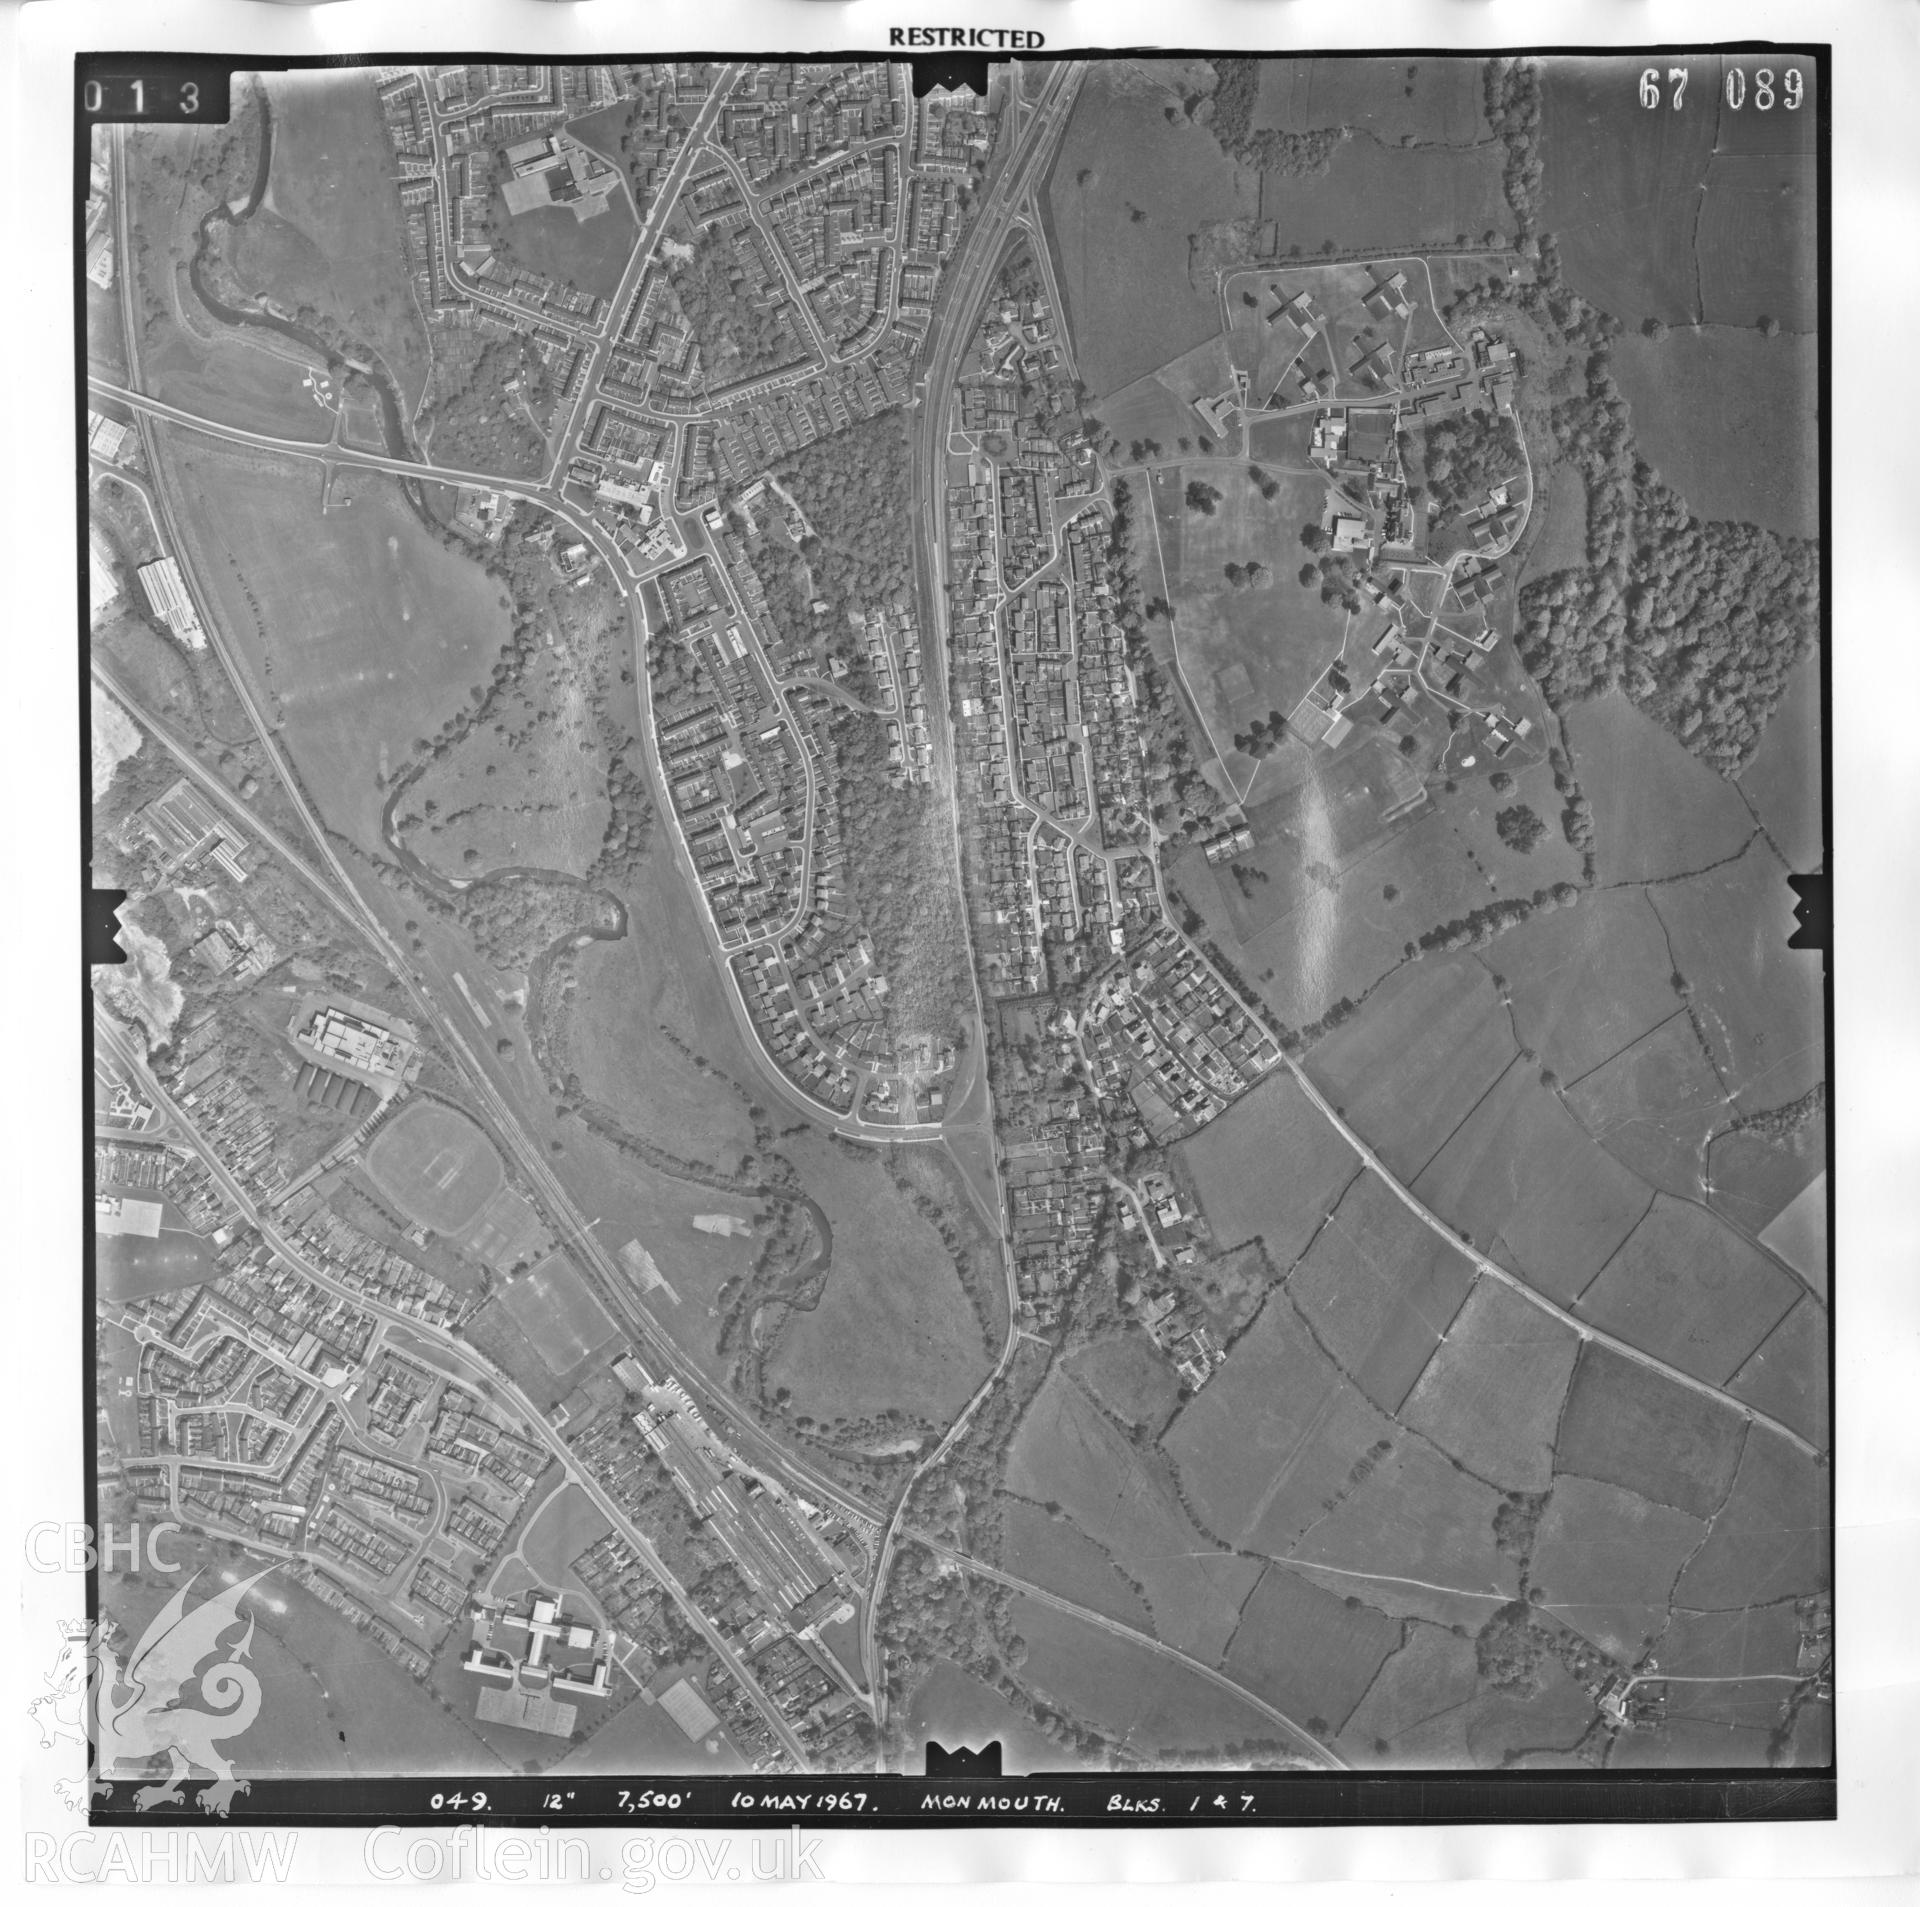 Aerial photograph of Cwmbran, taken on 10th May 1967. Included as part of Archaeology Wales' desk based assessment of former Llantarnam Community Primary School, Croeswen, Oakfield, Cwmbran, conducted in 2017.